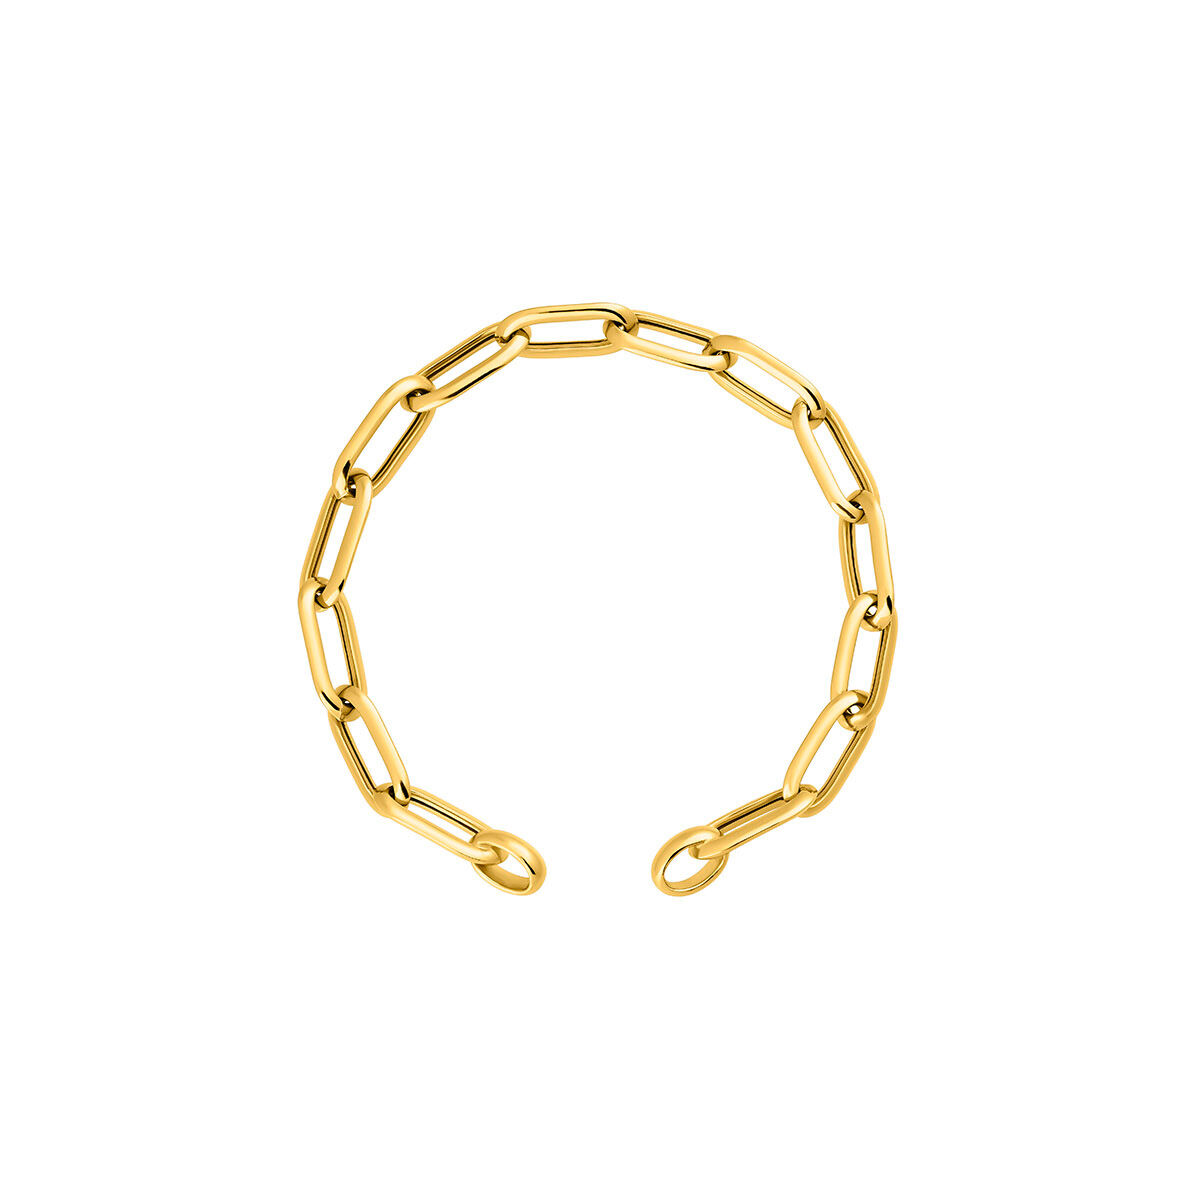 Silver rectangular cable link chain bracelet in 18k yellow gold-plated silver, J05340-02-16, hi-res